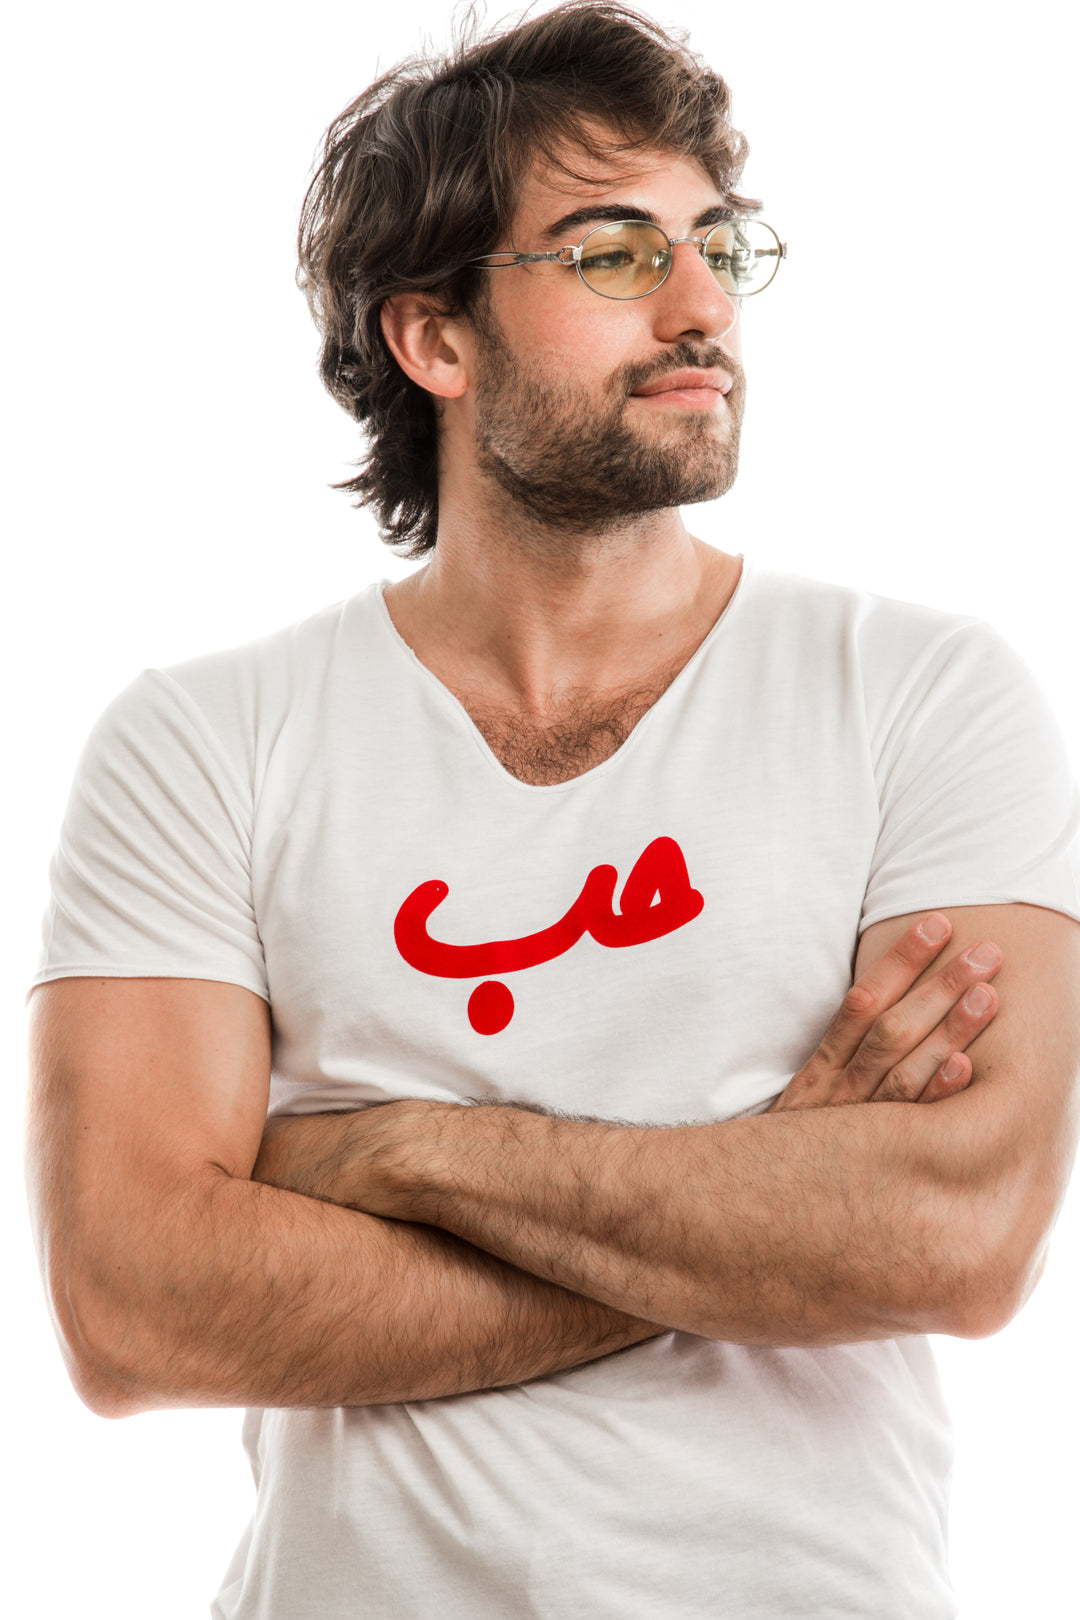 Young adult male wearing white T-shirt with Hobb written in Arabic حب and printed in red velvet in the center of the T-shirt along with glasses.